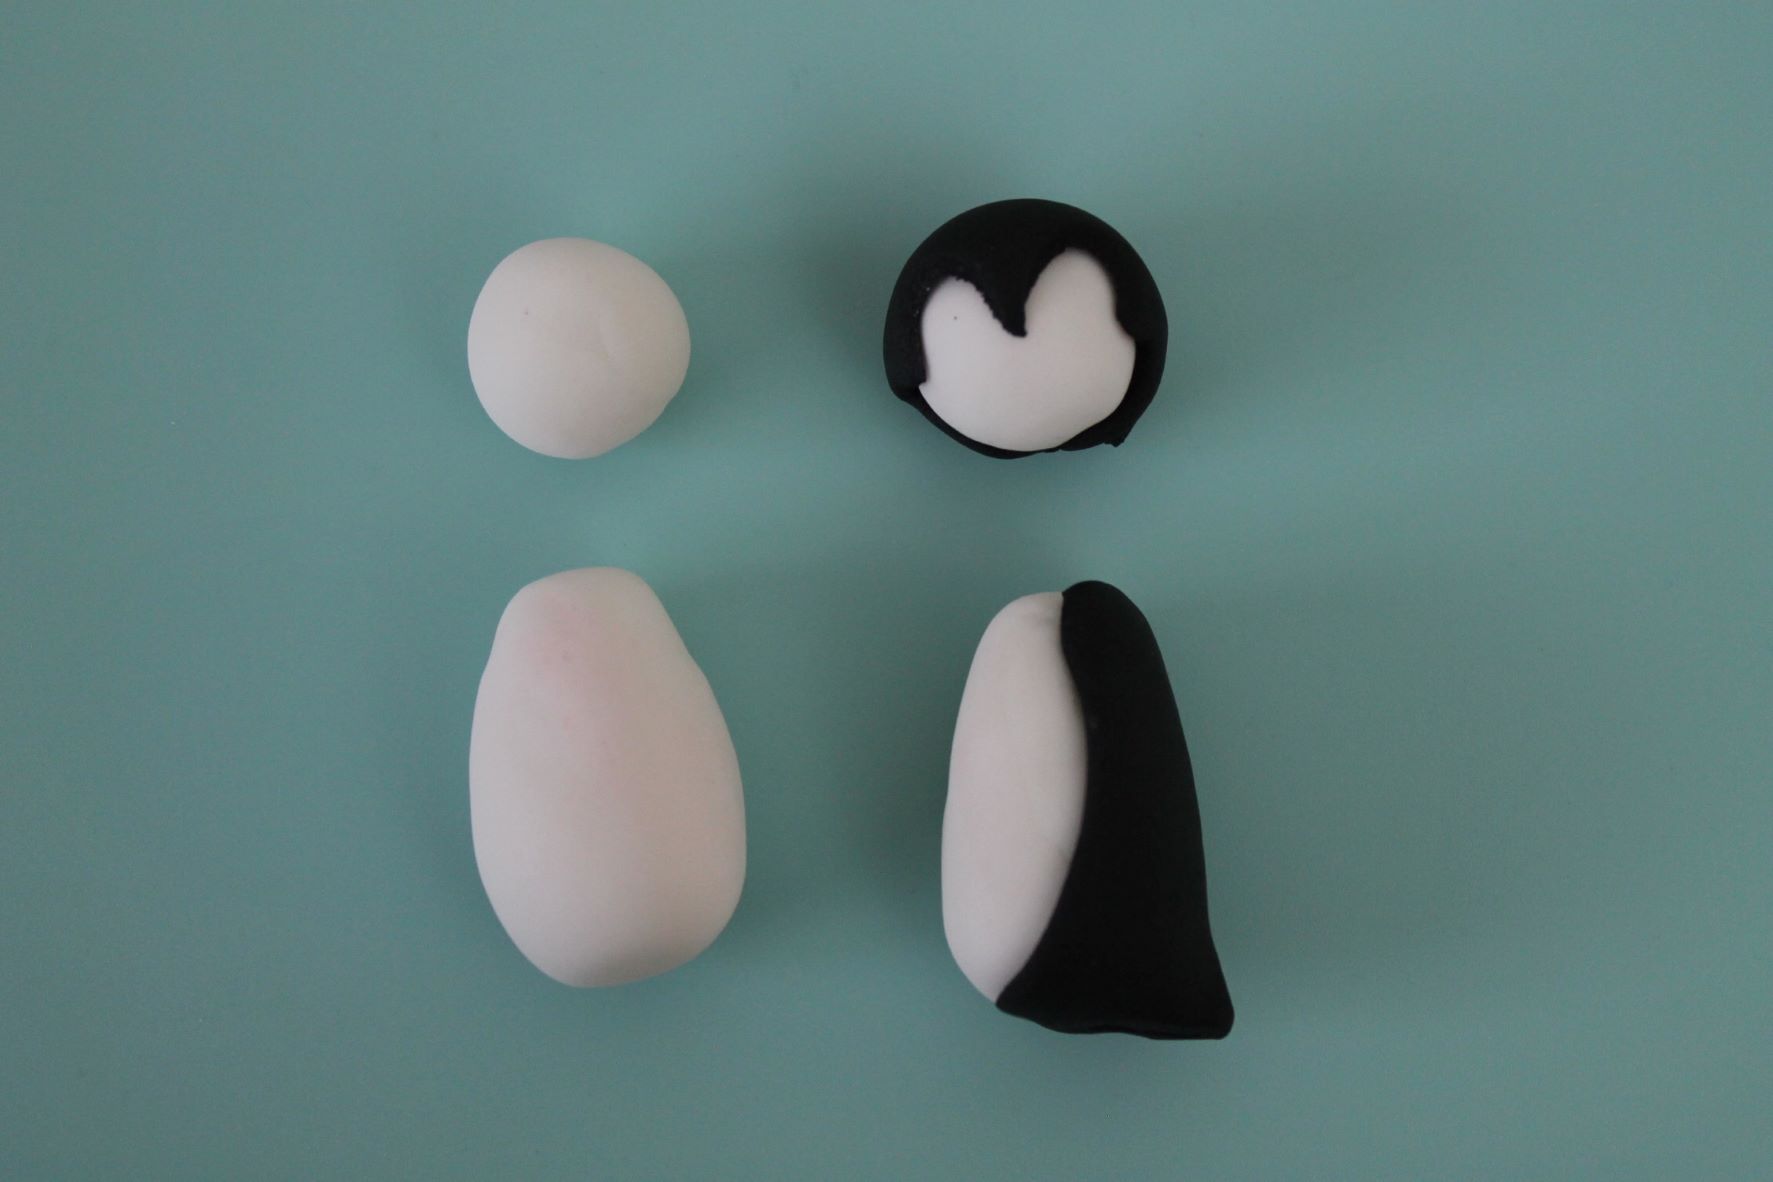 For the penguin, roll a small white ball of modelling paste for the penguin’s head and a larger slim teardrop shape for the body. Roll out some black modelling paste and cut out two small circles at one end creating a point. Roll another piece of black, this time a rectangle just longer than the body that wraps around the back of the body, from one side of the body to the other. Attach the rectangular piece to the back of the body, pinching slightly at the bum to make a tail. Add the piece with the point to the head, wrapping it around the ball shaped head so that it leaves a white area at the front of the face.